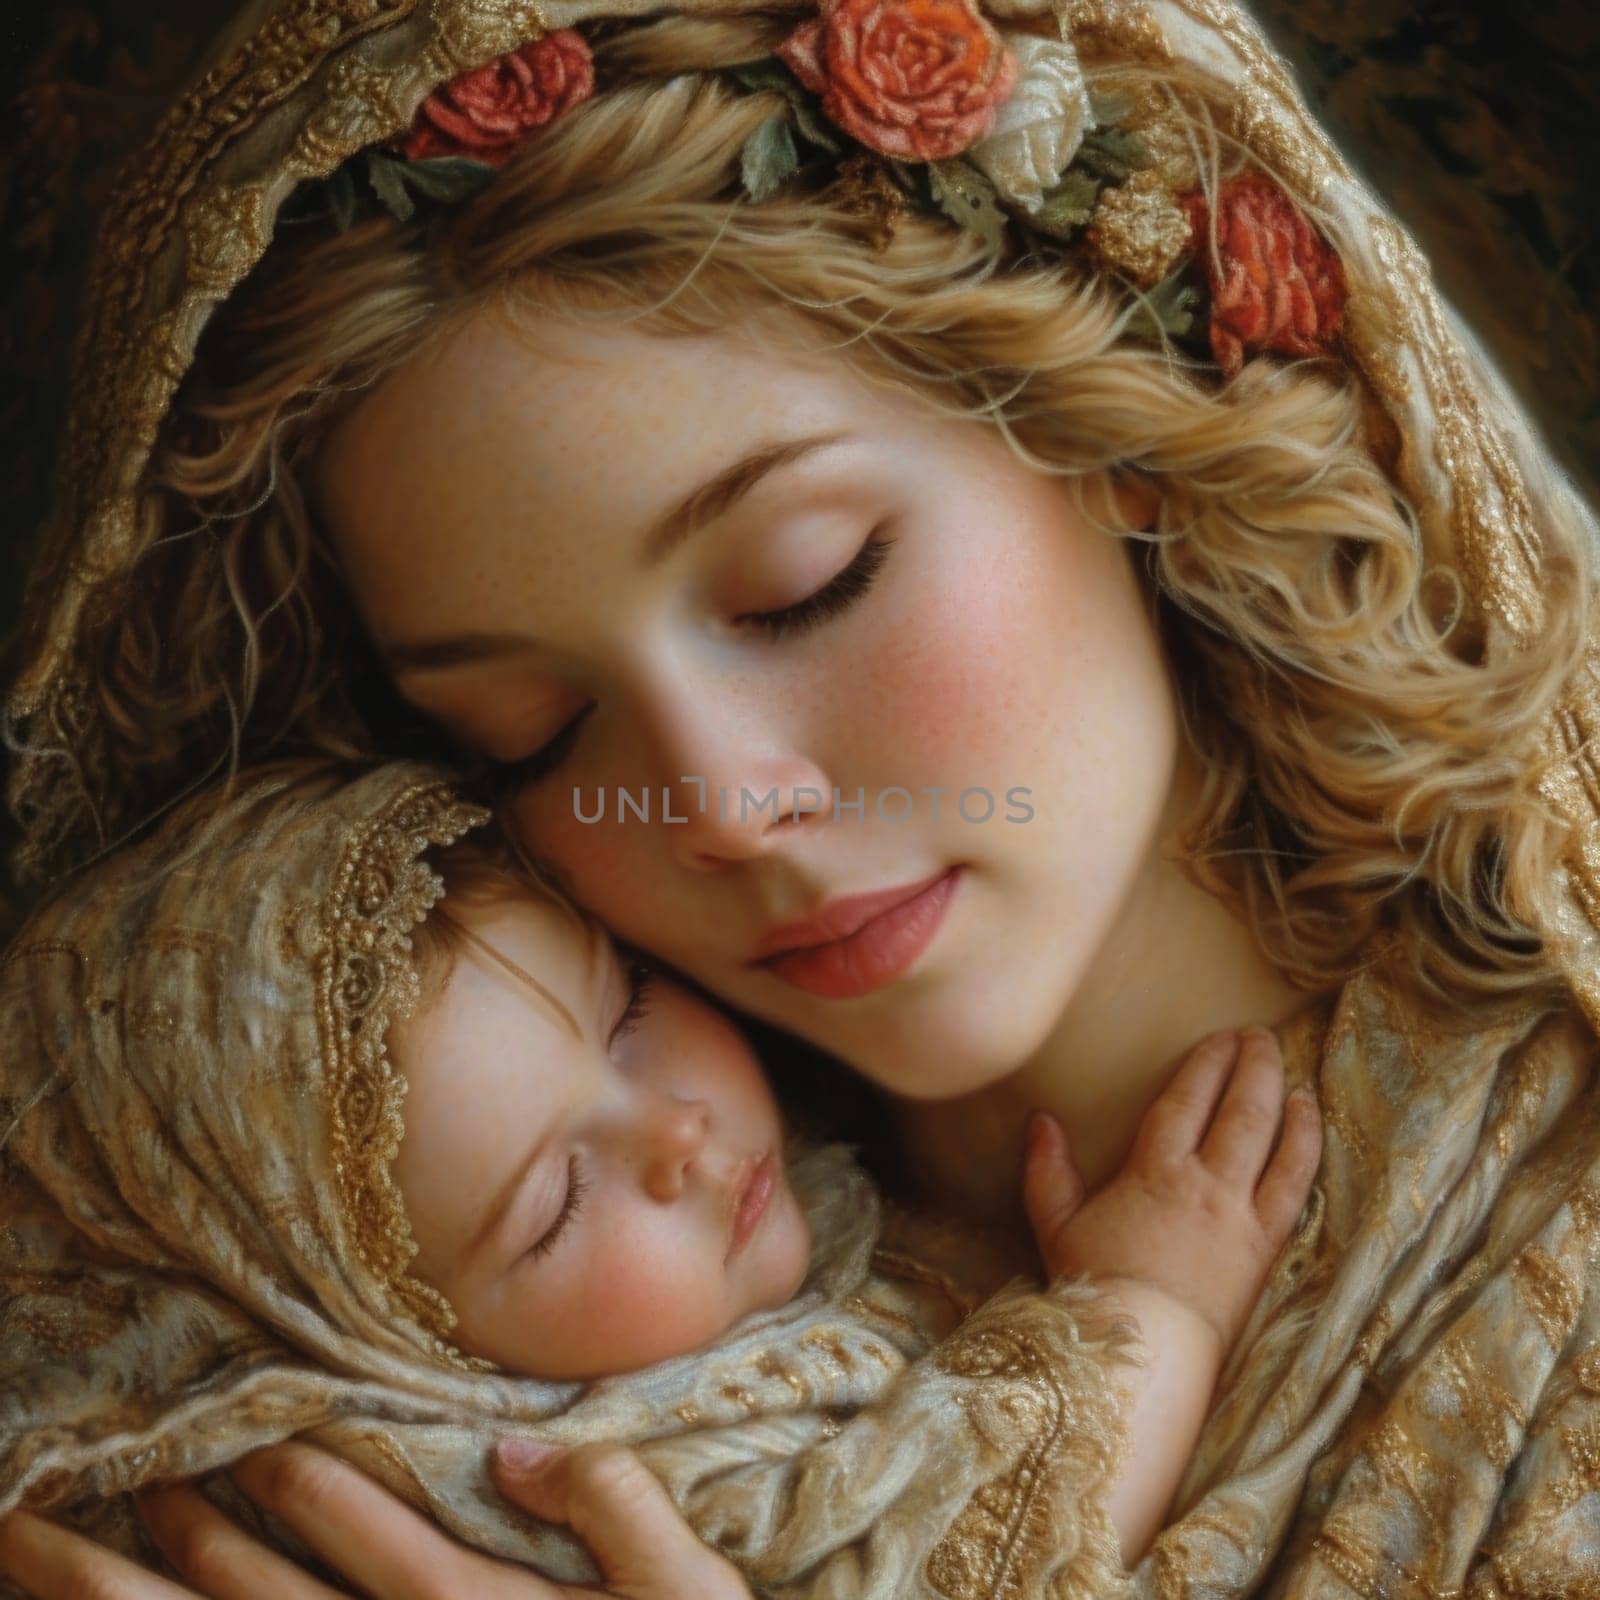 A photograph capturing the Holy Virgin Mary cradling Baby Jesus Christ in her arms.